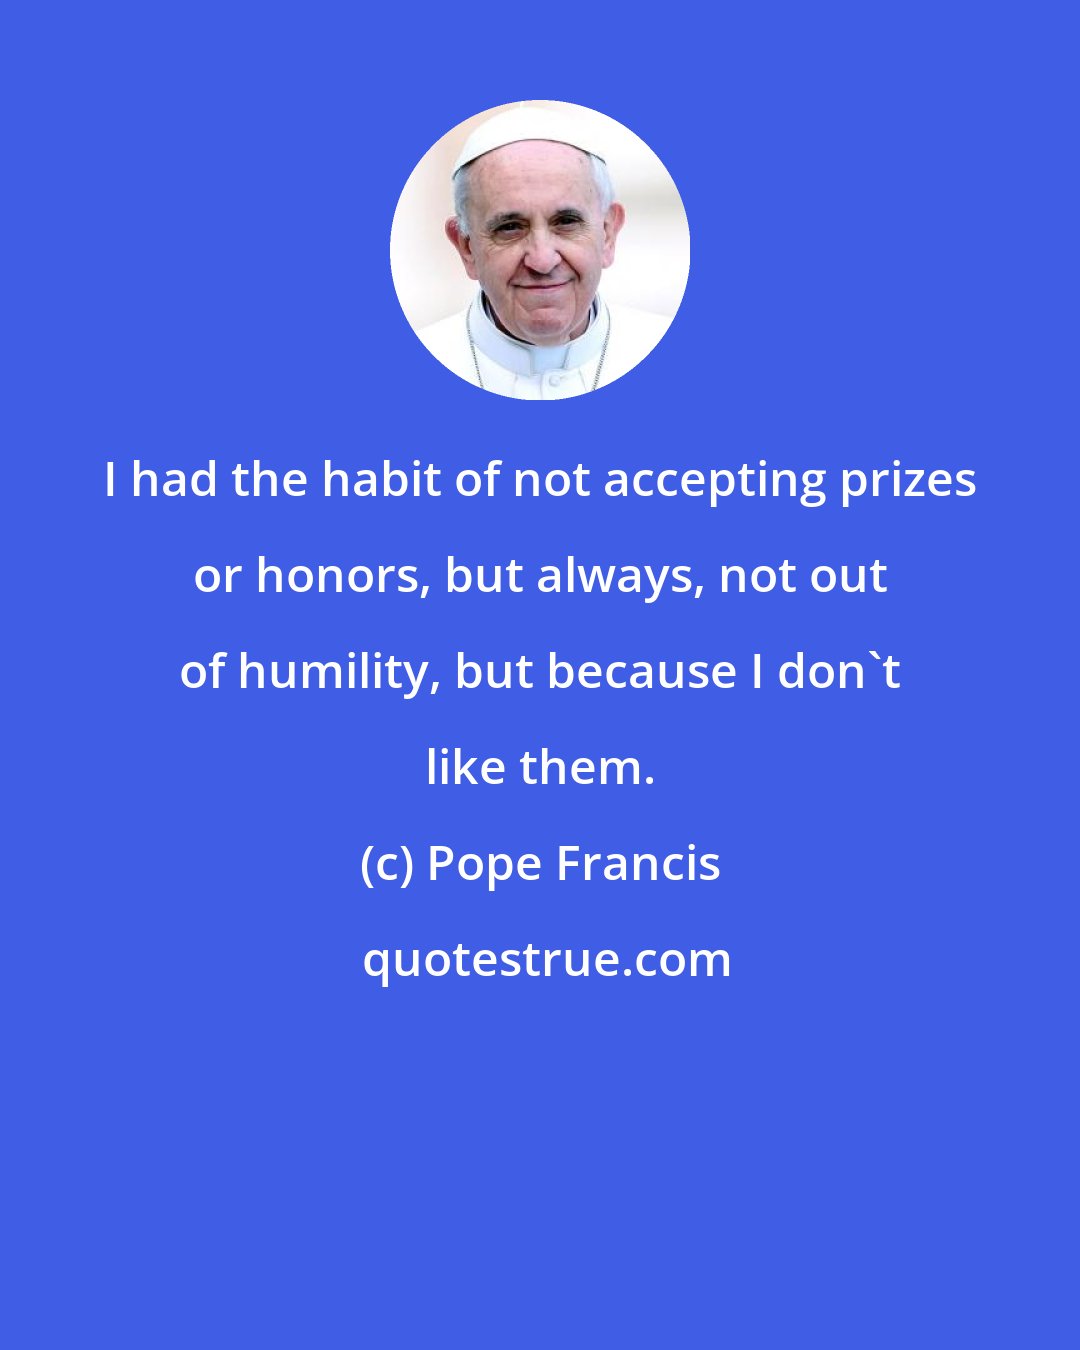 Pope Francis: I had the habit of not accepting prizes or honors, but always, not out of humility, but because I don't like them.